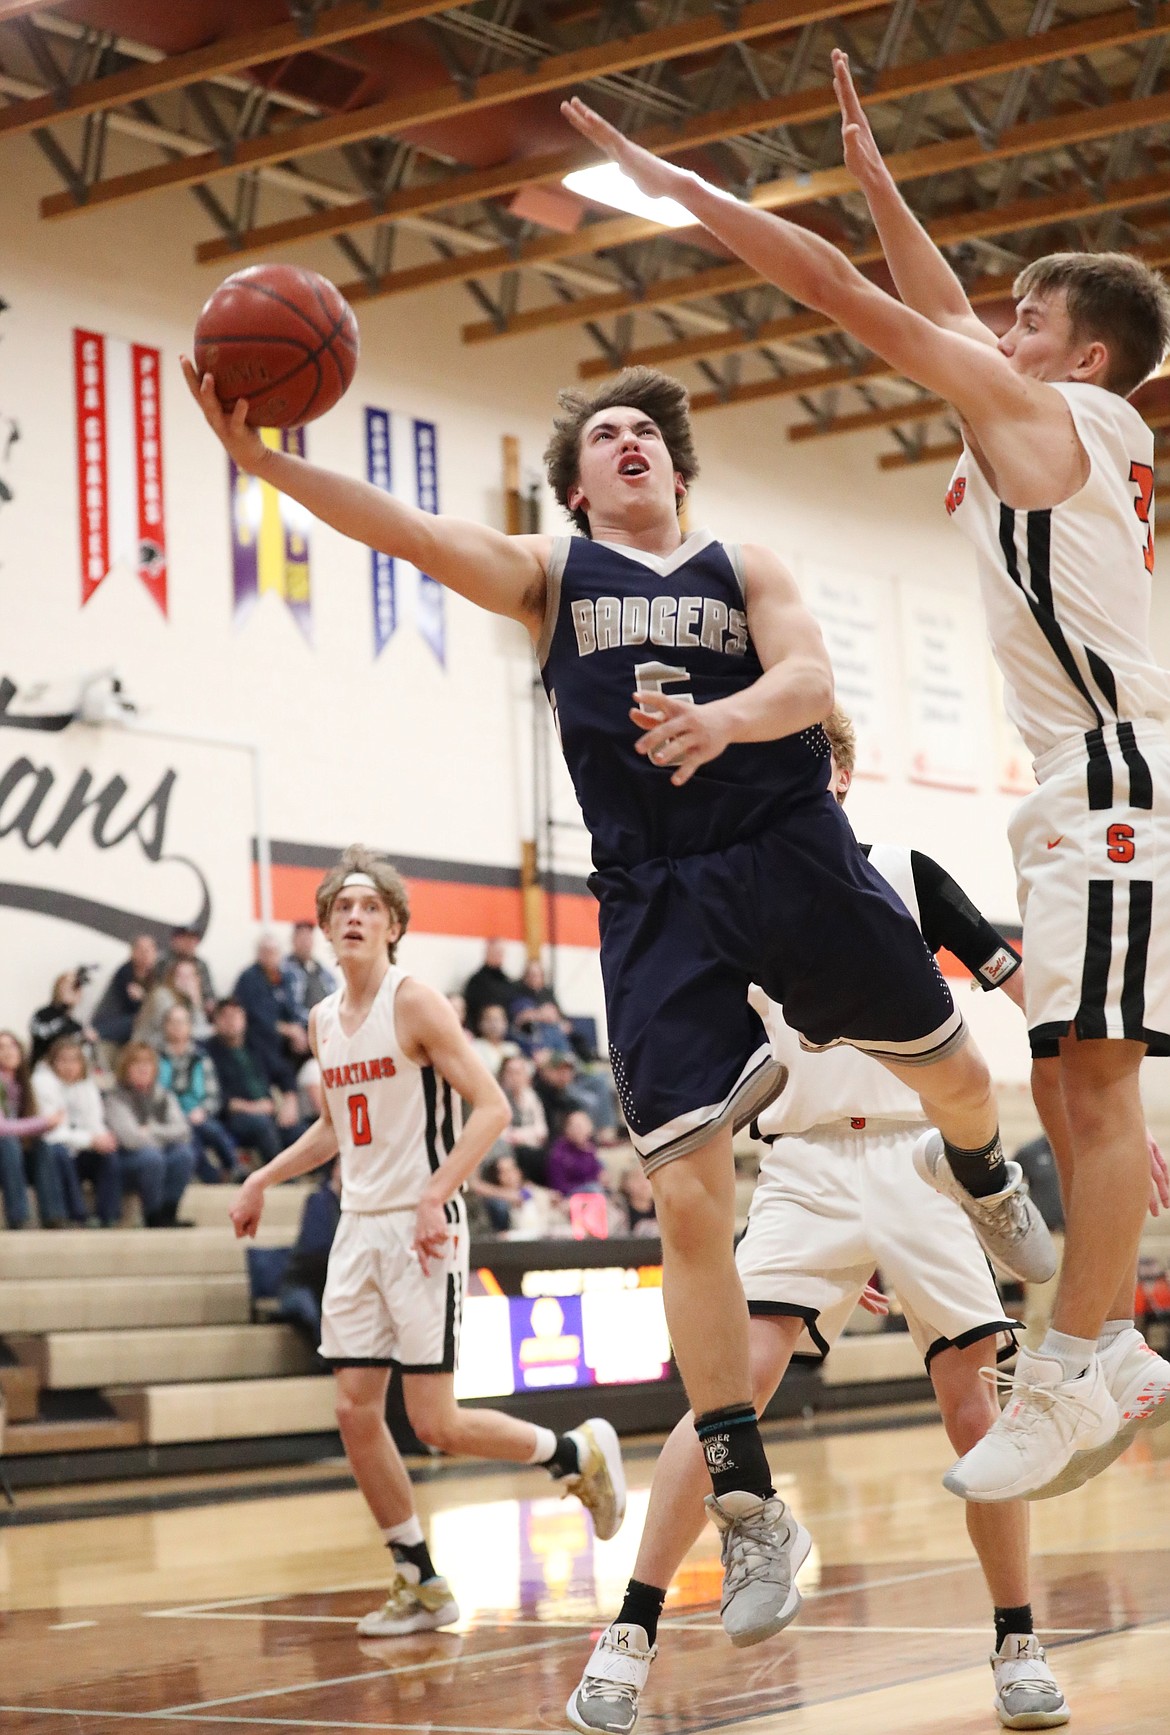 Blake Rice from Bonners Ferry attacks the basket while Priest River's Jordan Nortz defends him on Saturday. Rice hit the game-winning free throw.